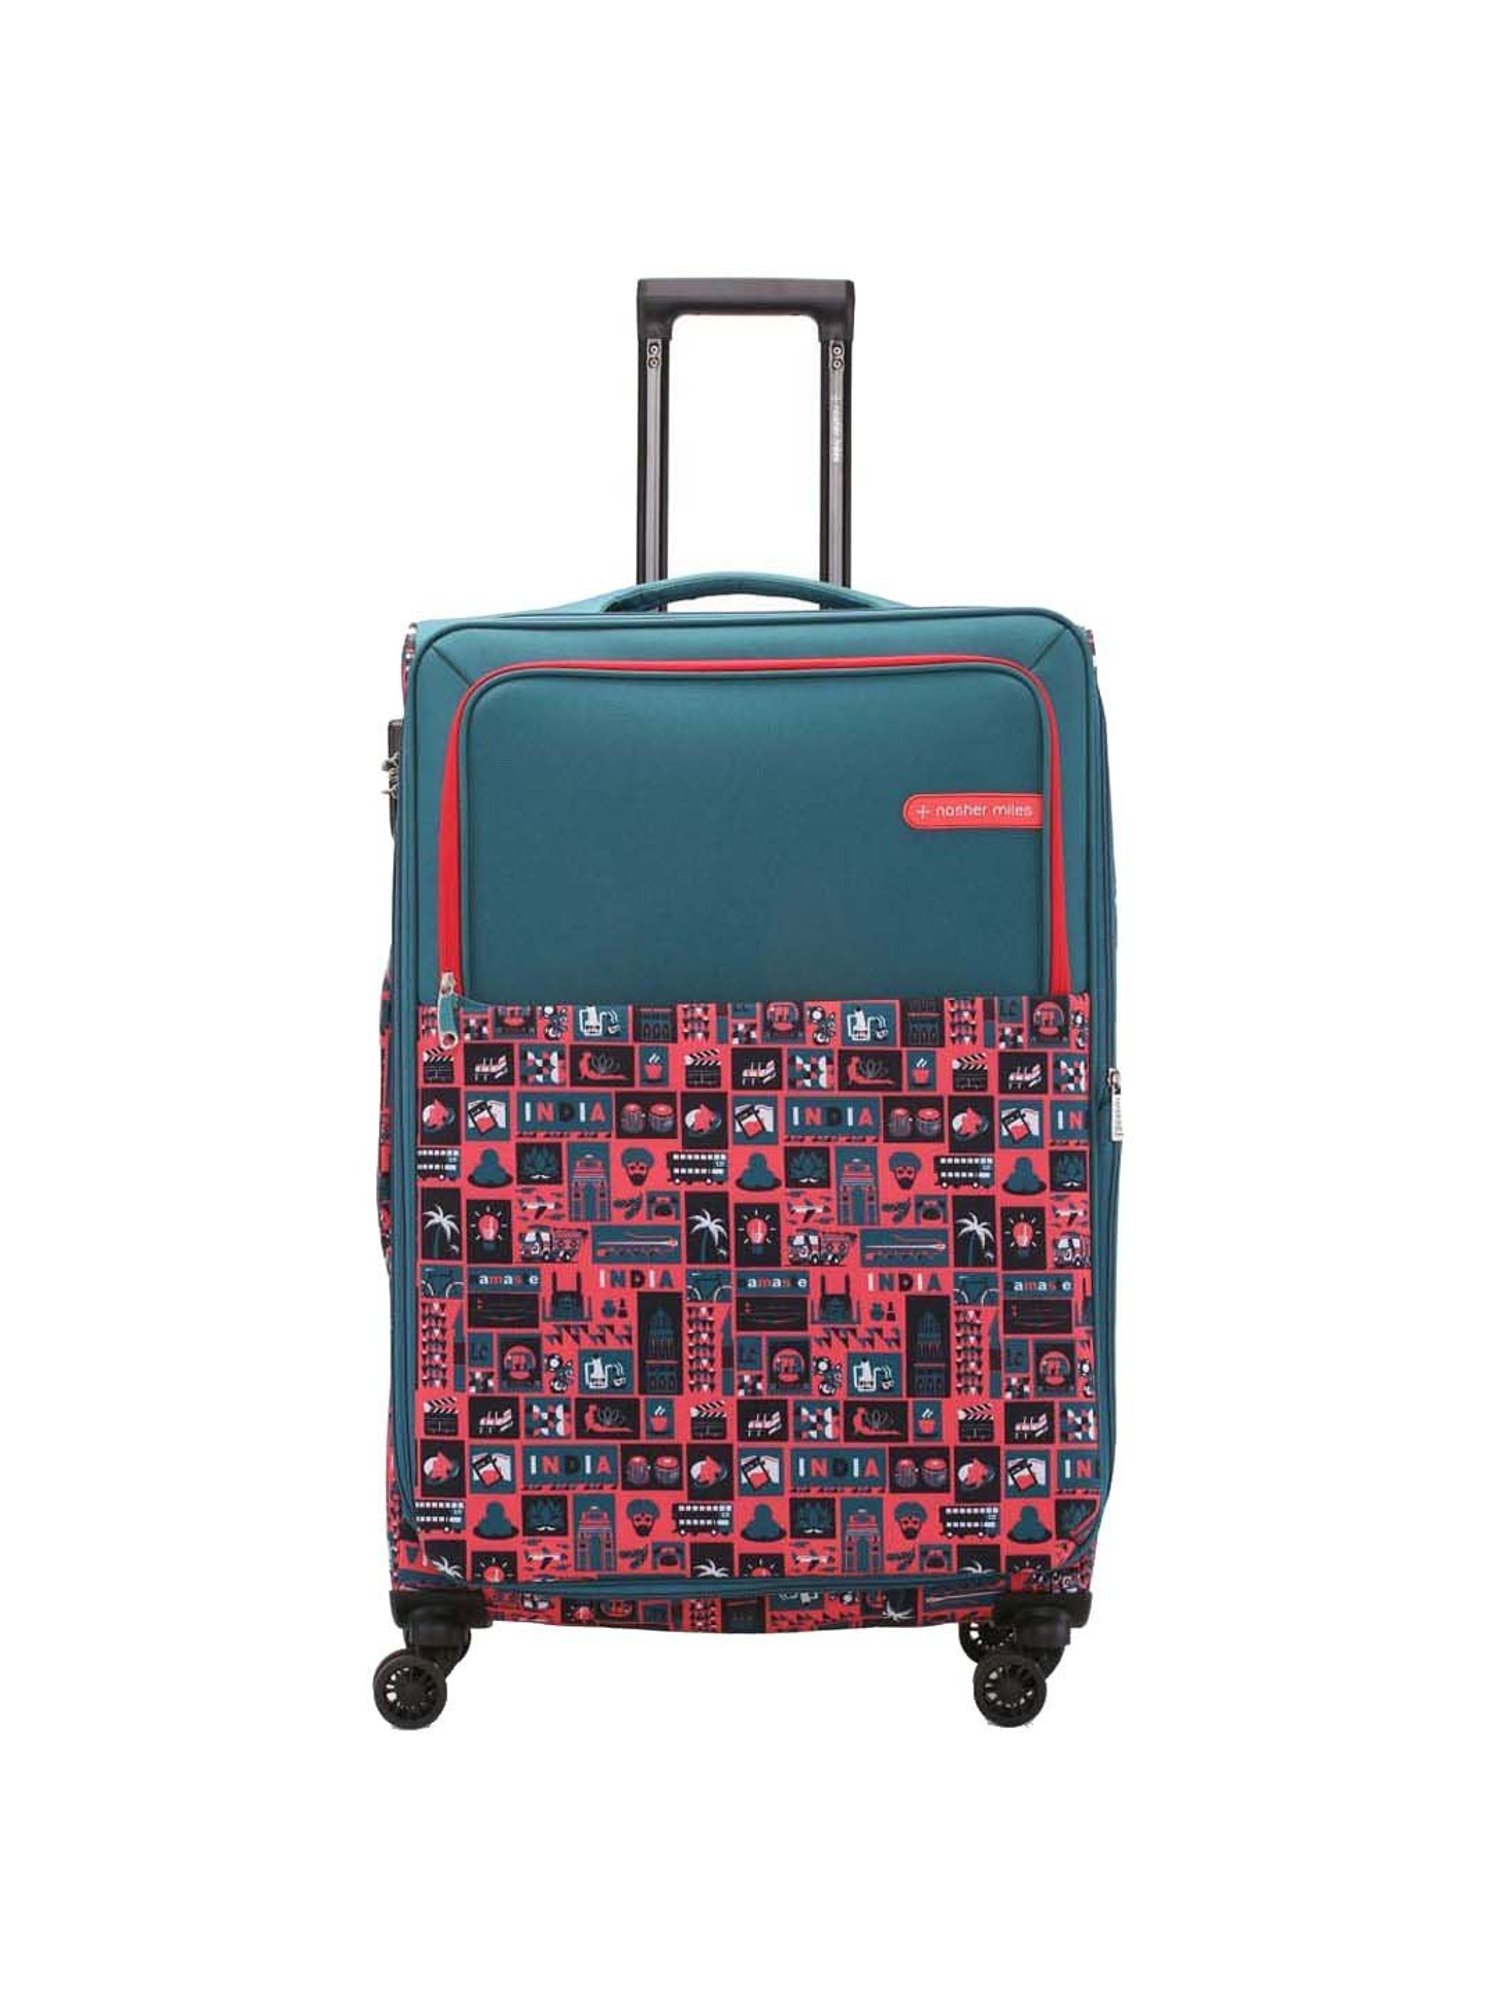 Stony Brook by Nasher Miles Stream Soft-Sided Polyester Check-in Luggage  Grey 28 inch |75cm Trolley Bag Expandable Check-in Suitcase - 28 inch Grey  - Price in India | Flipkart.com